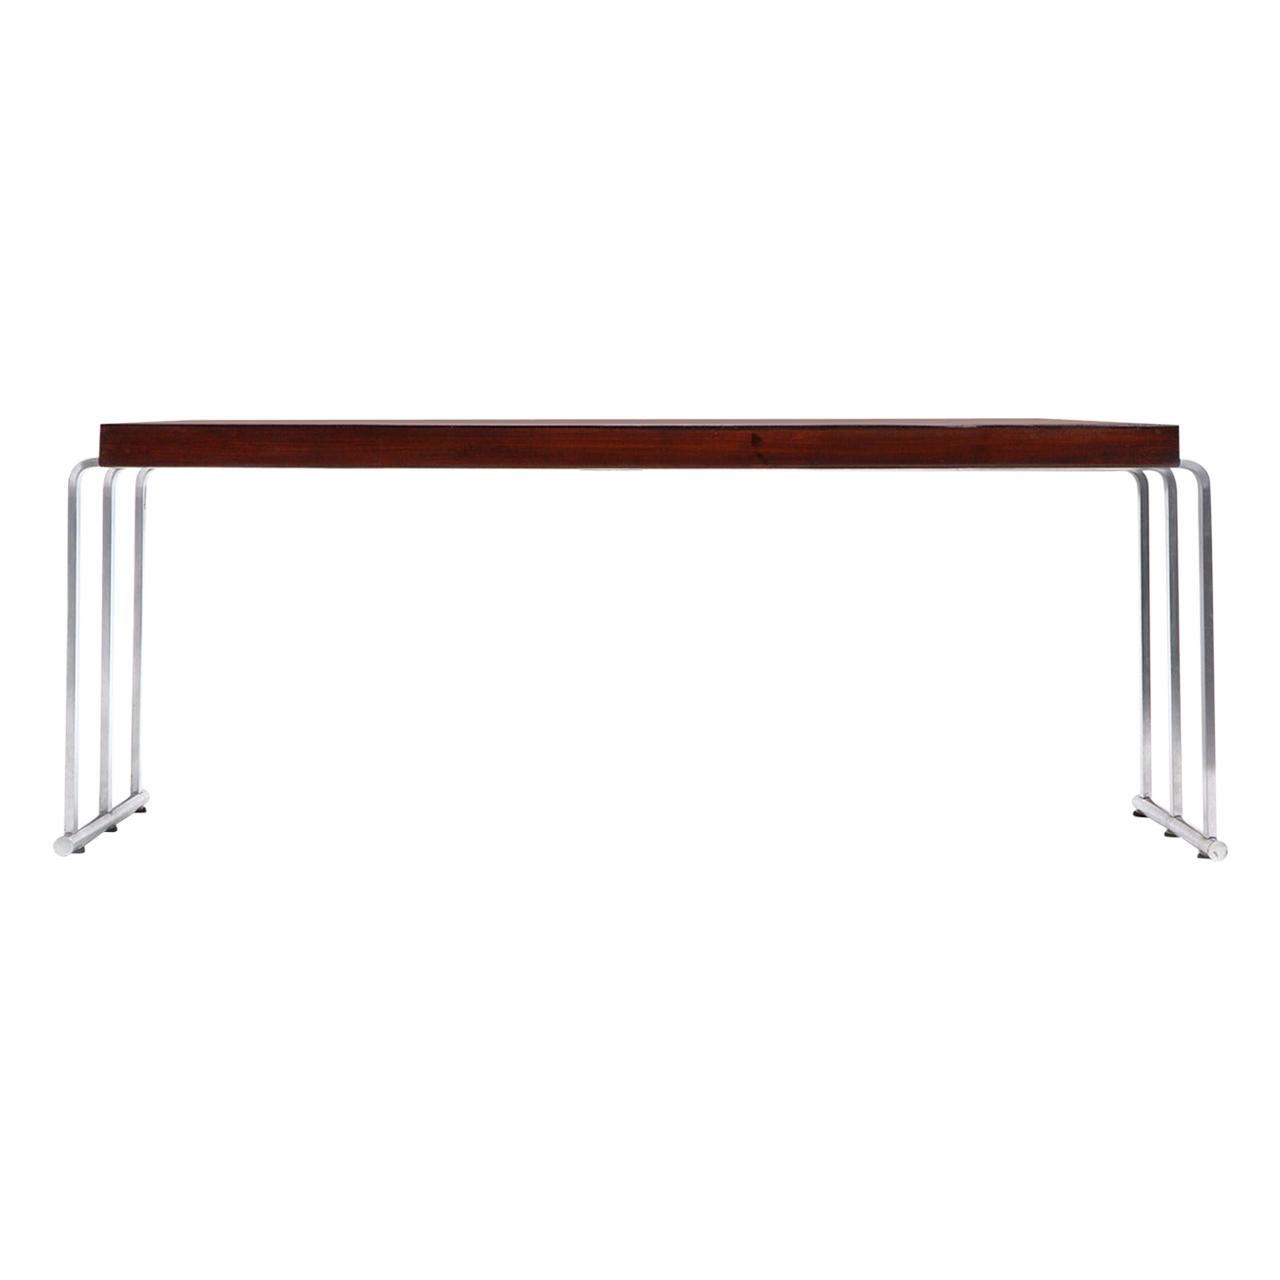 1930s Art Deco Mahogany Low Table by Gilbert Rohde for Herman Miller